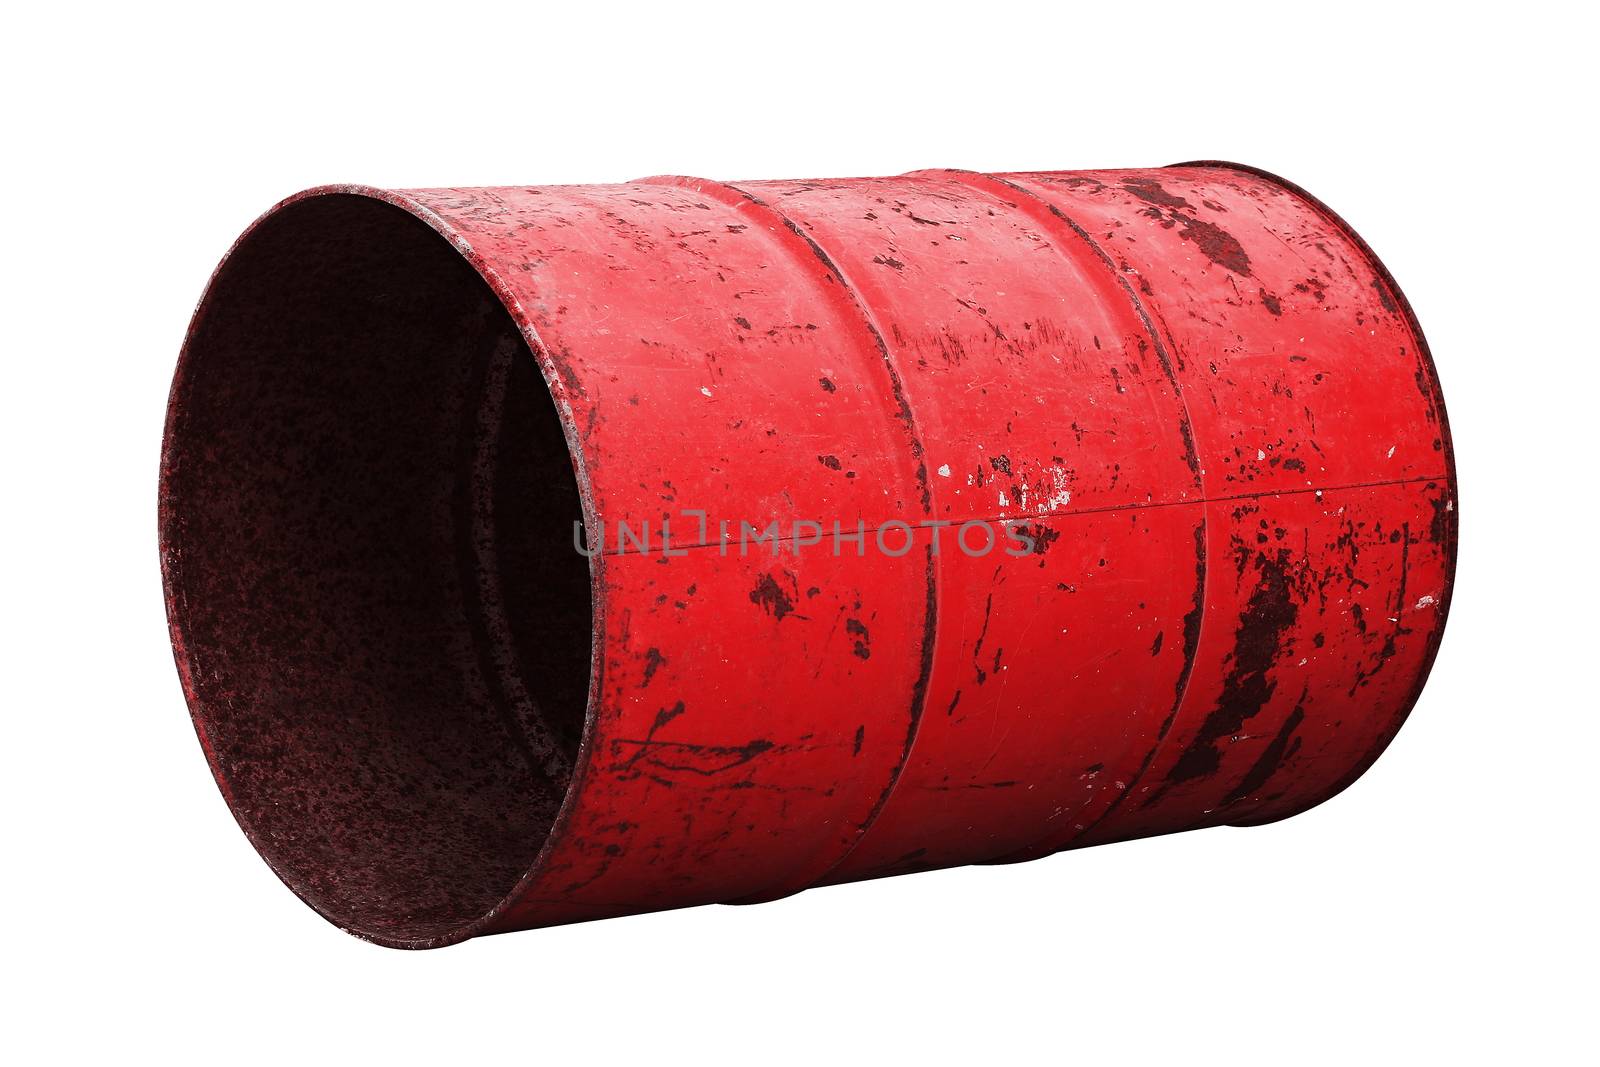 Barrel Oil red Old isolated on background white by cgdeaw